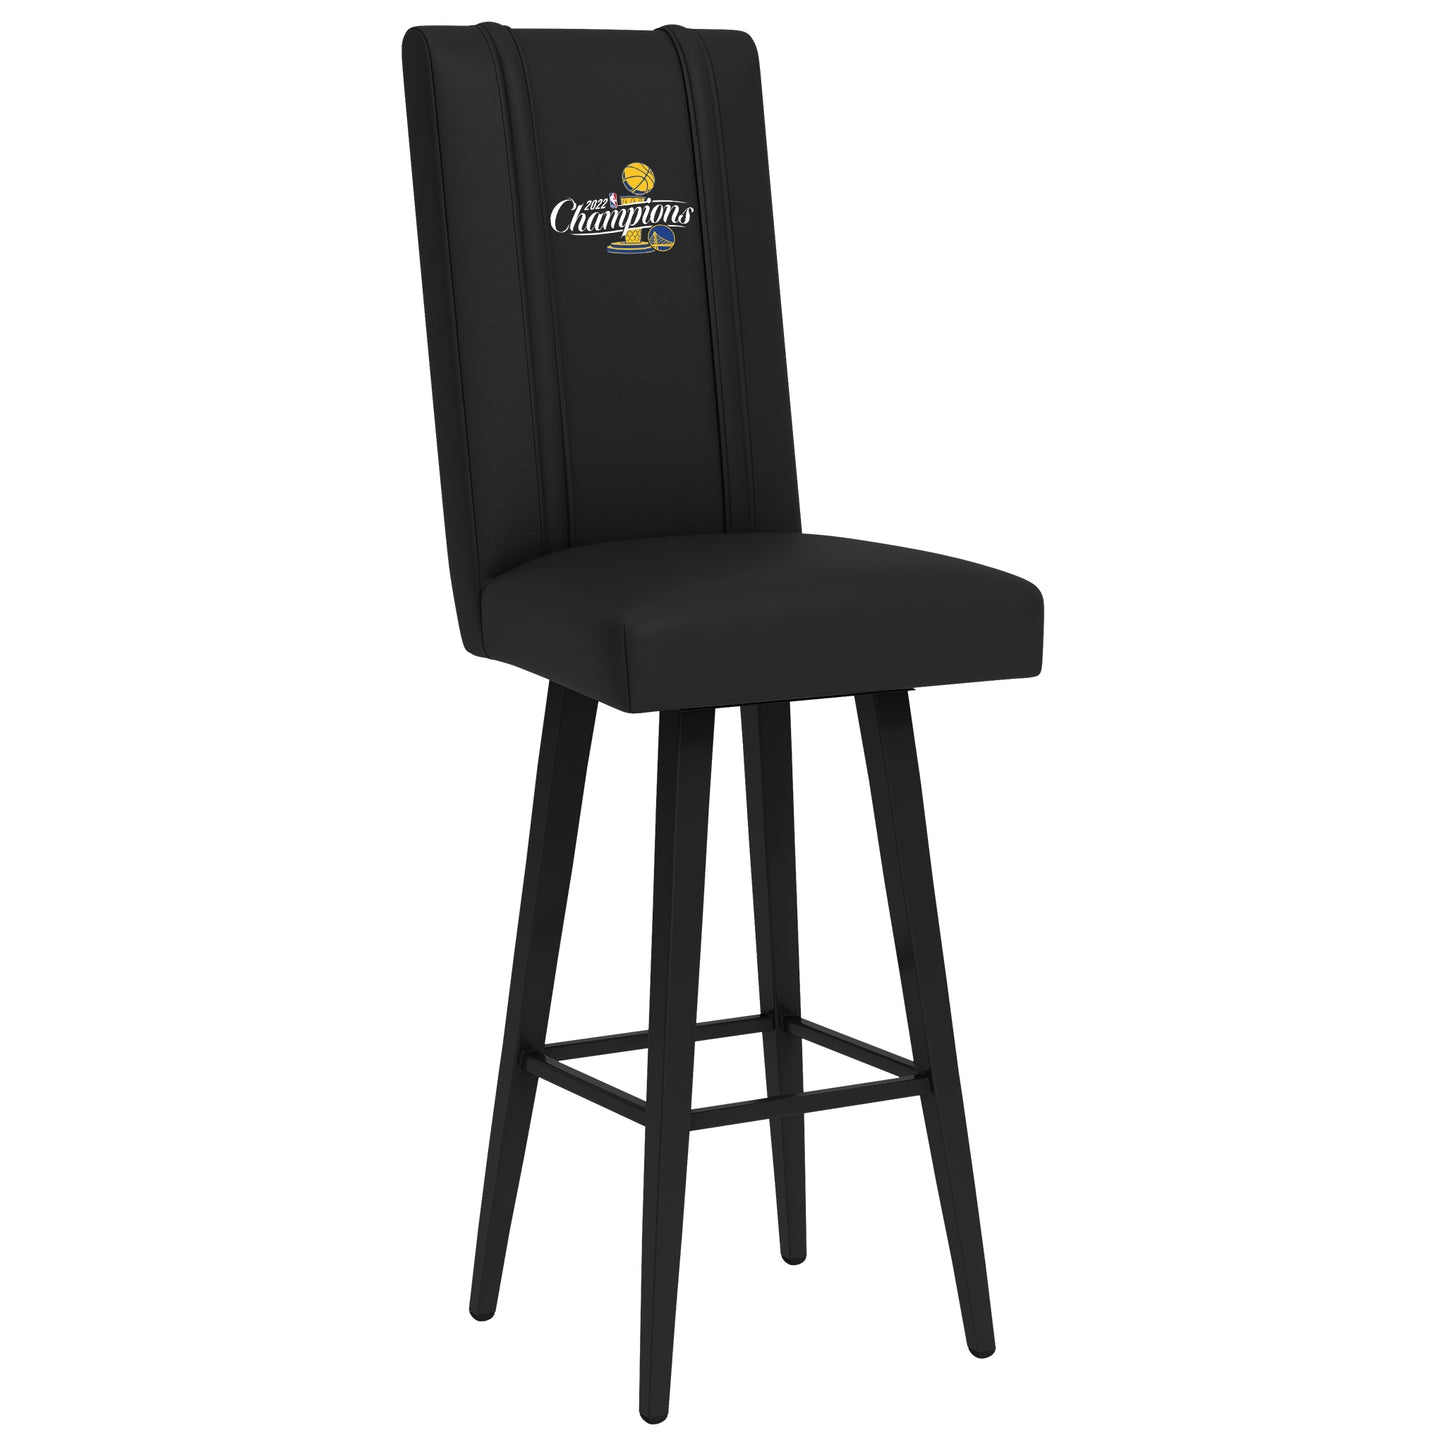 Swivel Bar Stool 2000 with Golden State Warriors 2022 Champions Logo